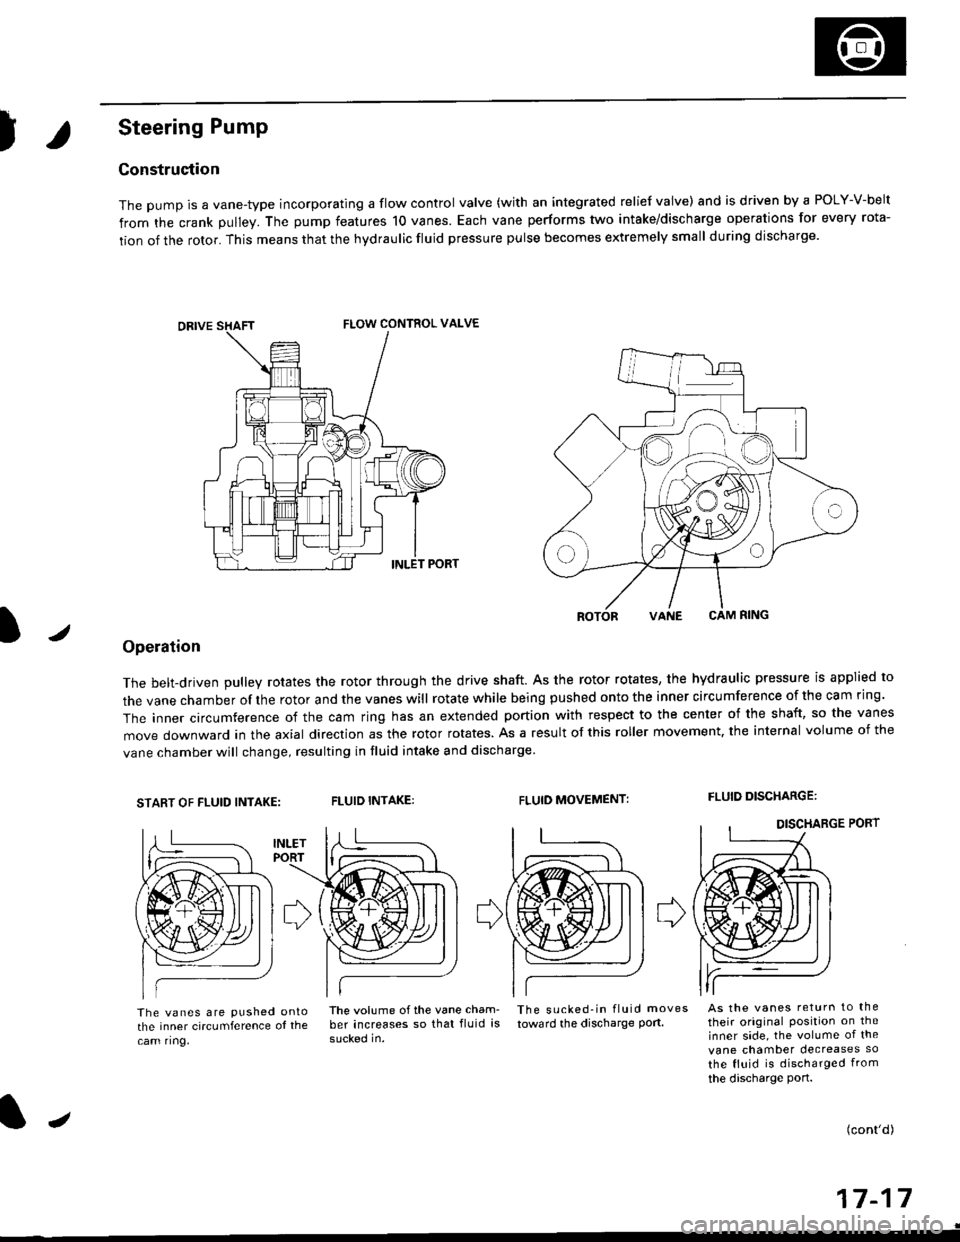 HONDA CIVIC 2000 6.G Owners Guide )
Steering Pump
Construction
The pump is a vane-type incorporating a flow control valve (with an integrated relief valve) and is driven by a POLY-V-belt
from the crank pulley. The pump features 10 van